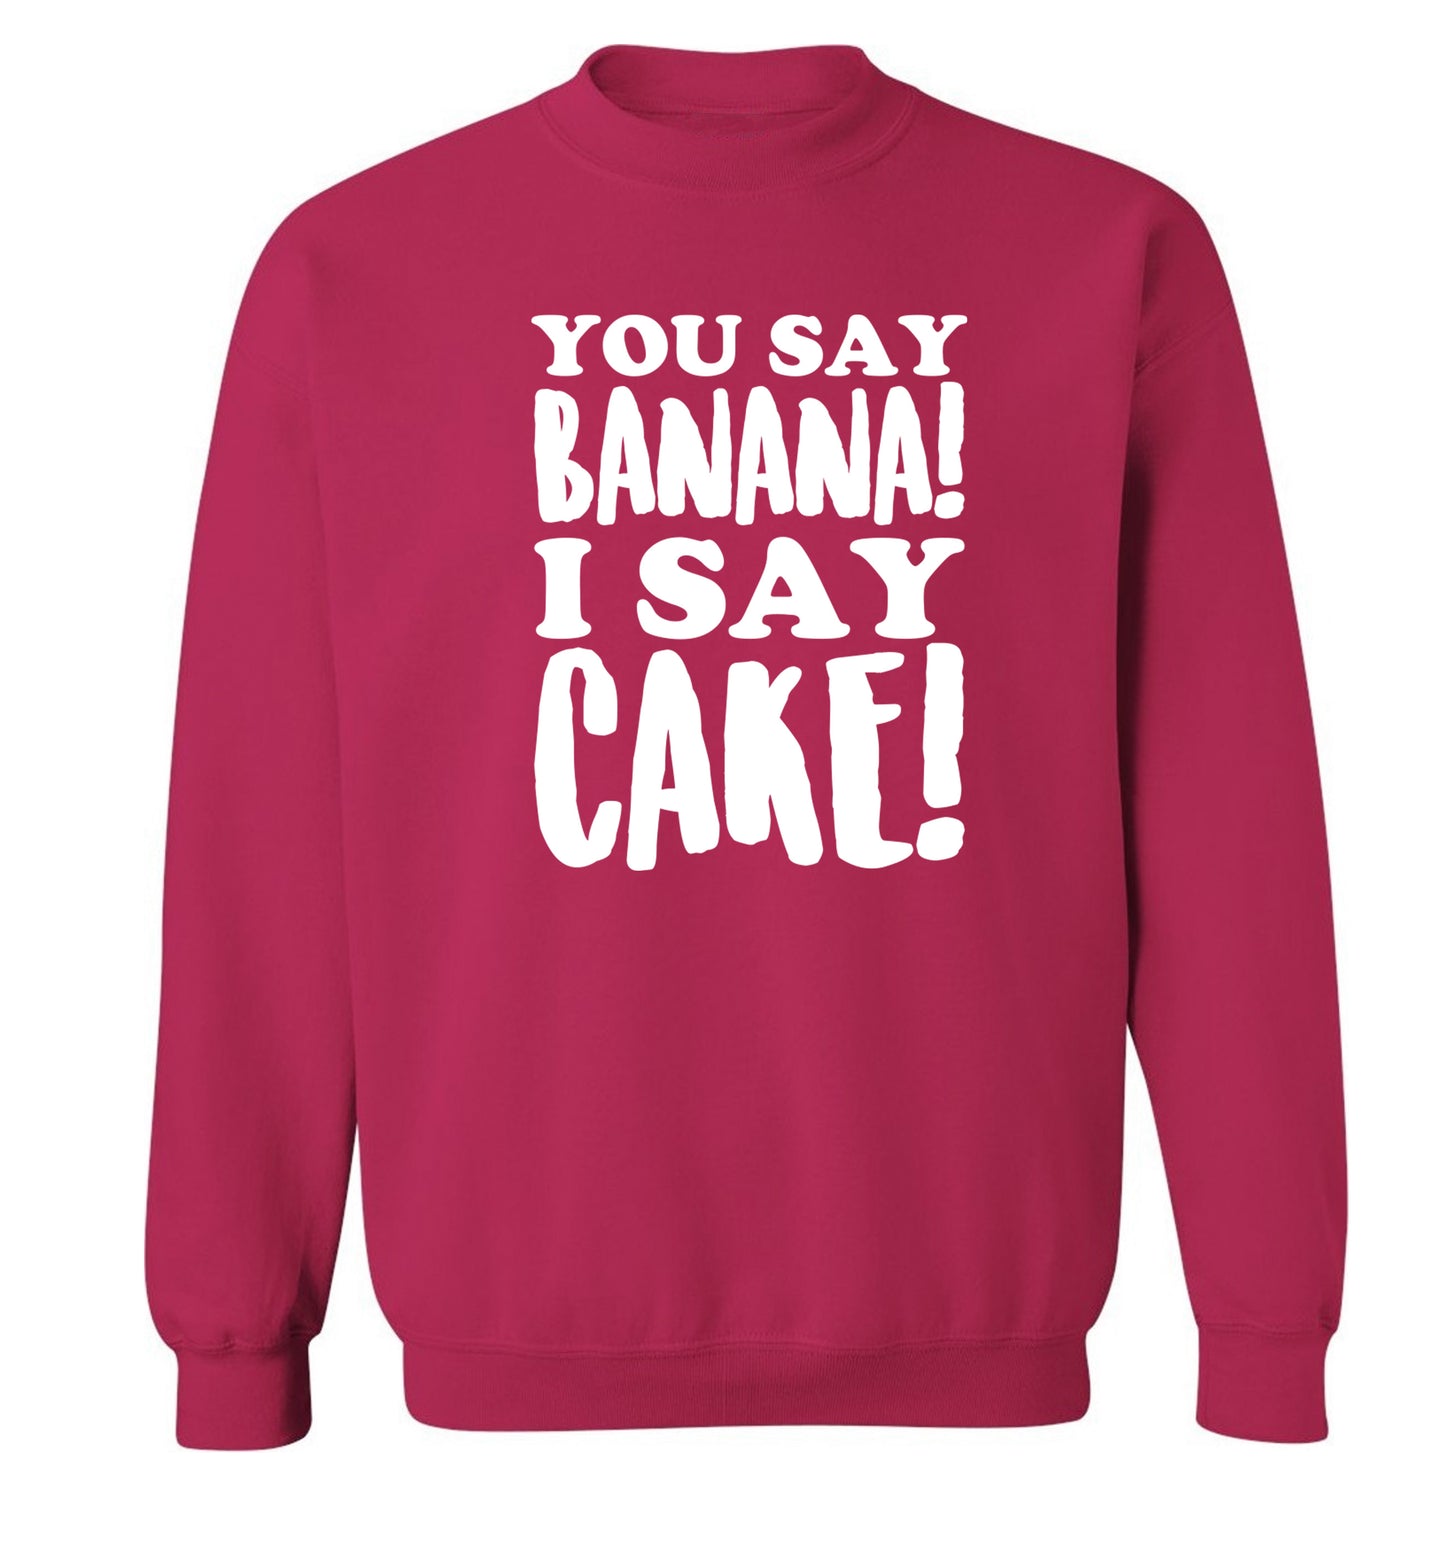 You say banana I say cake! Adult's unisex pink Sweater 2XL